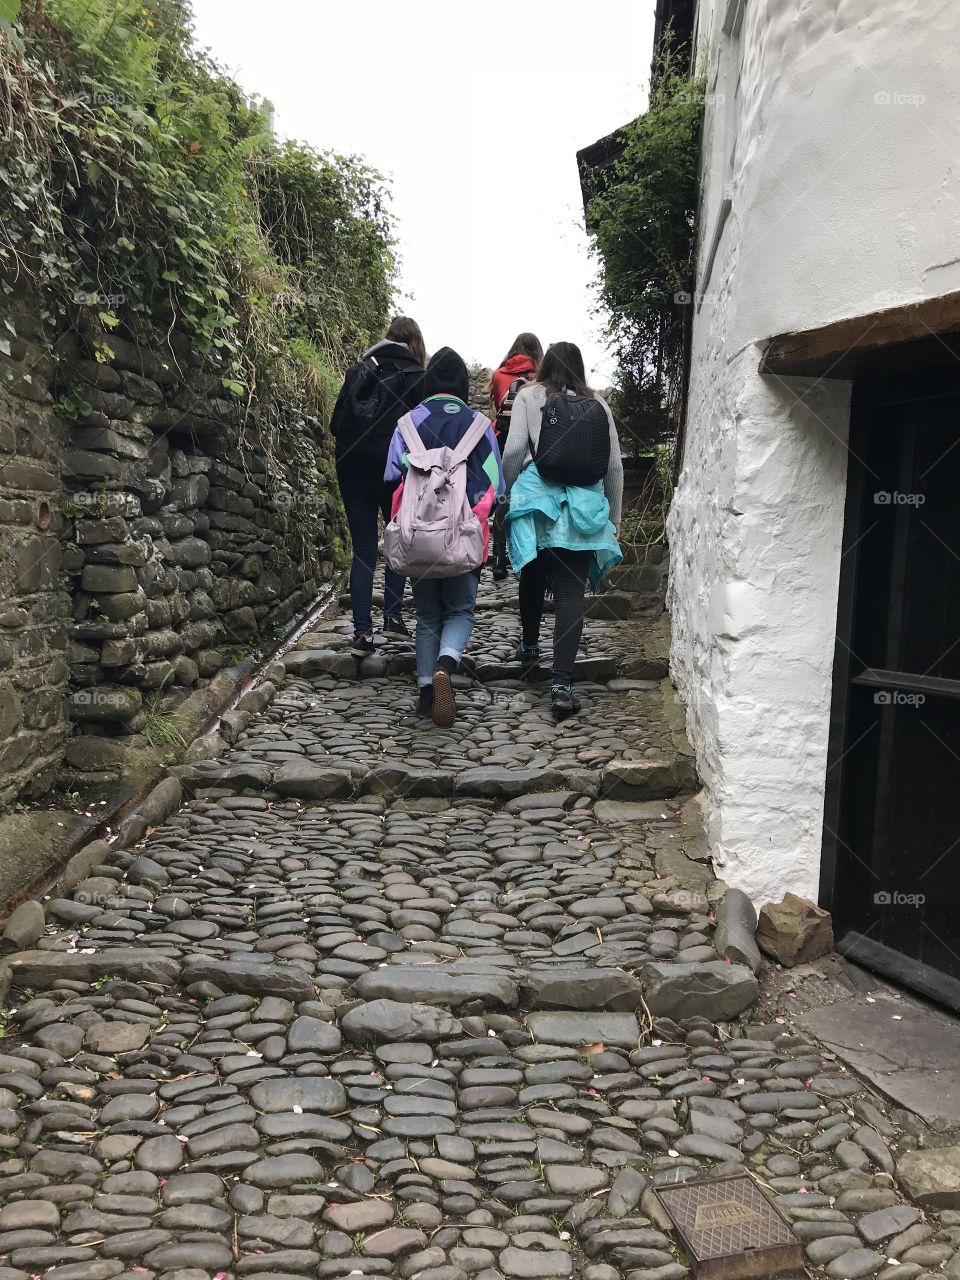 Young visitors to this beautiful place that is Clovelly, where you get one half a mile of these cobbled stones.